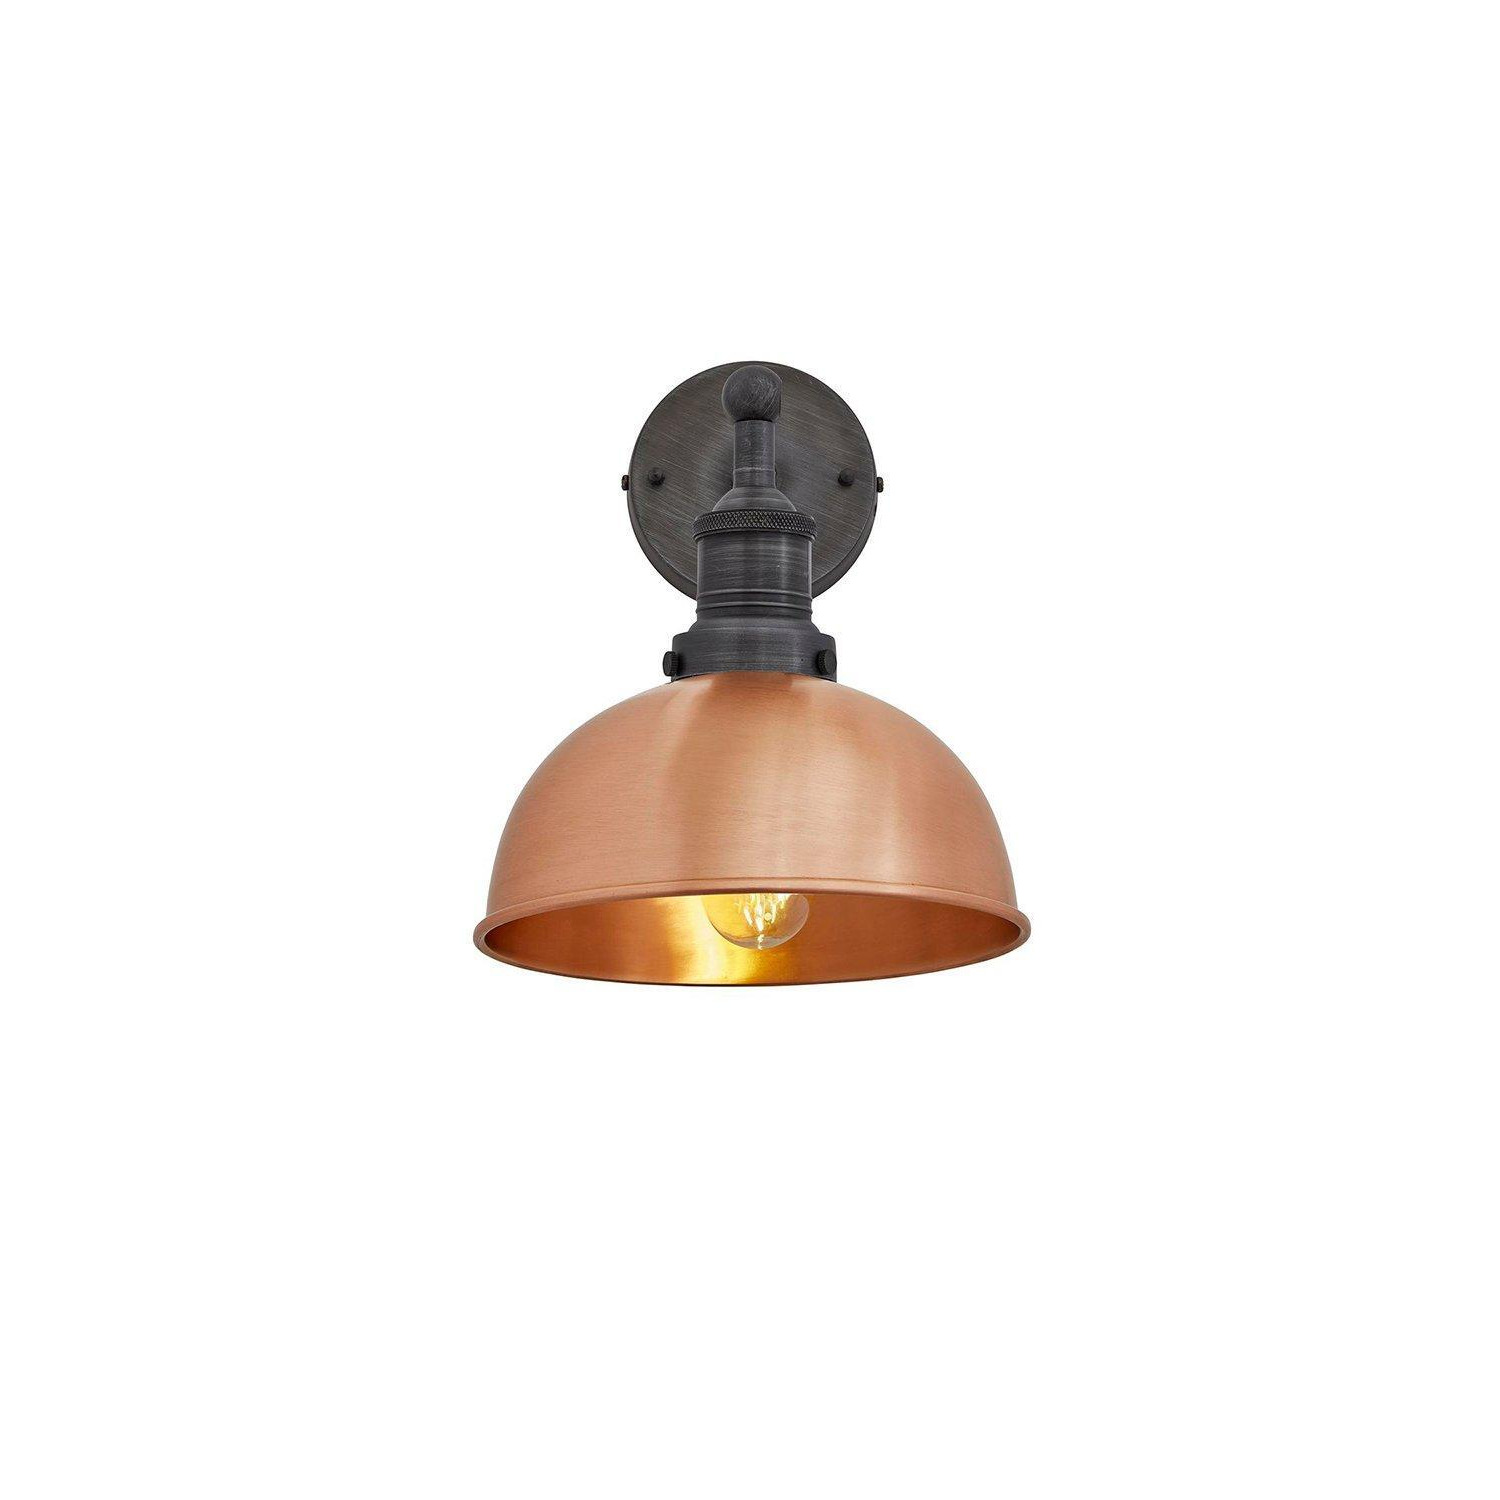 Brooklyn Dome Wall Light, 8 Inch, Copper, Pewter Holder - image 1